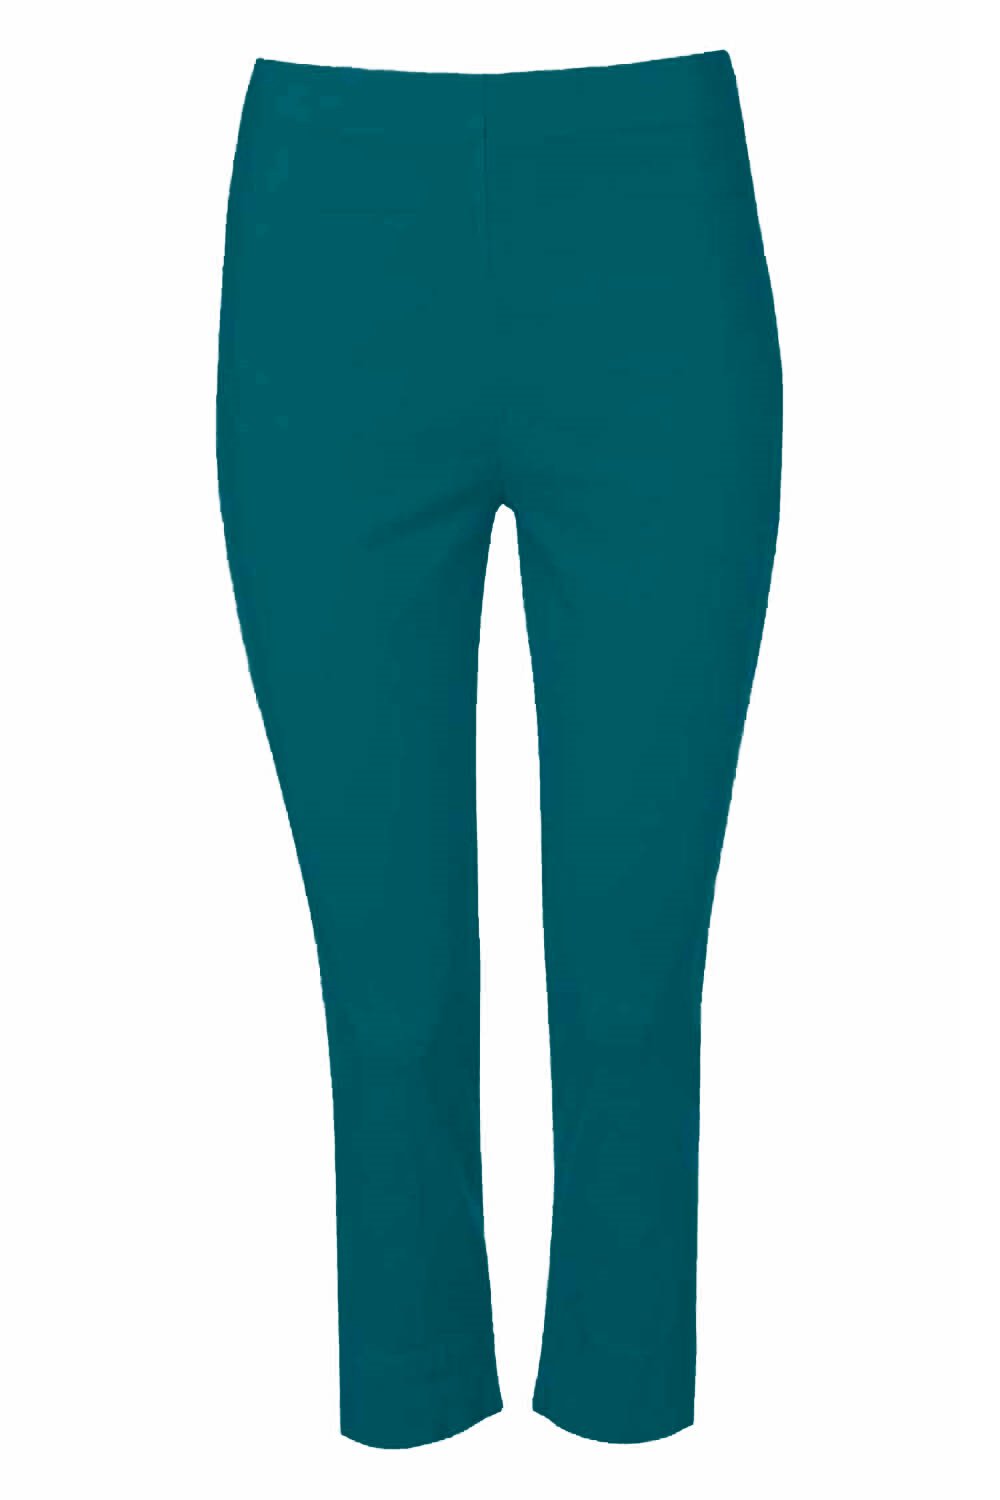 Jade Green Cropped Stretch Trouser, Image 4 of 4